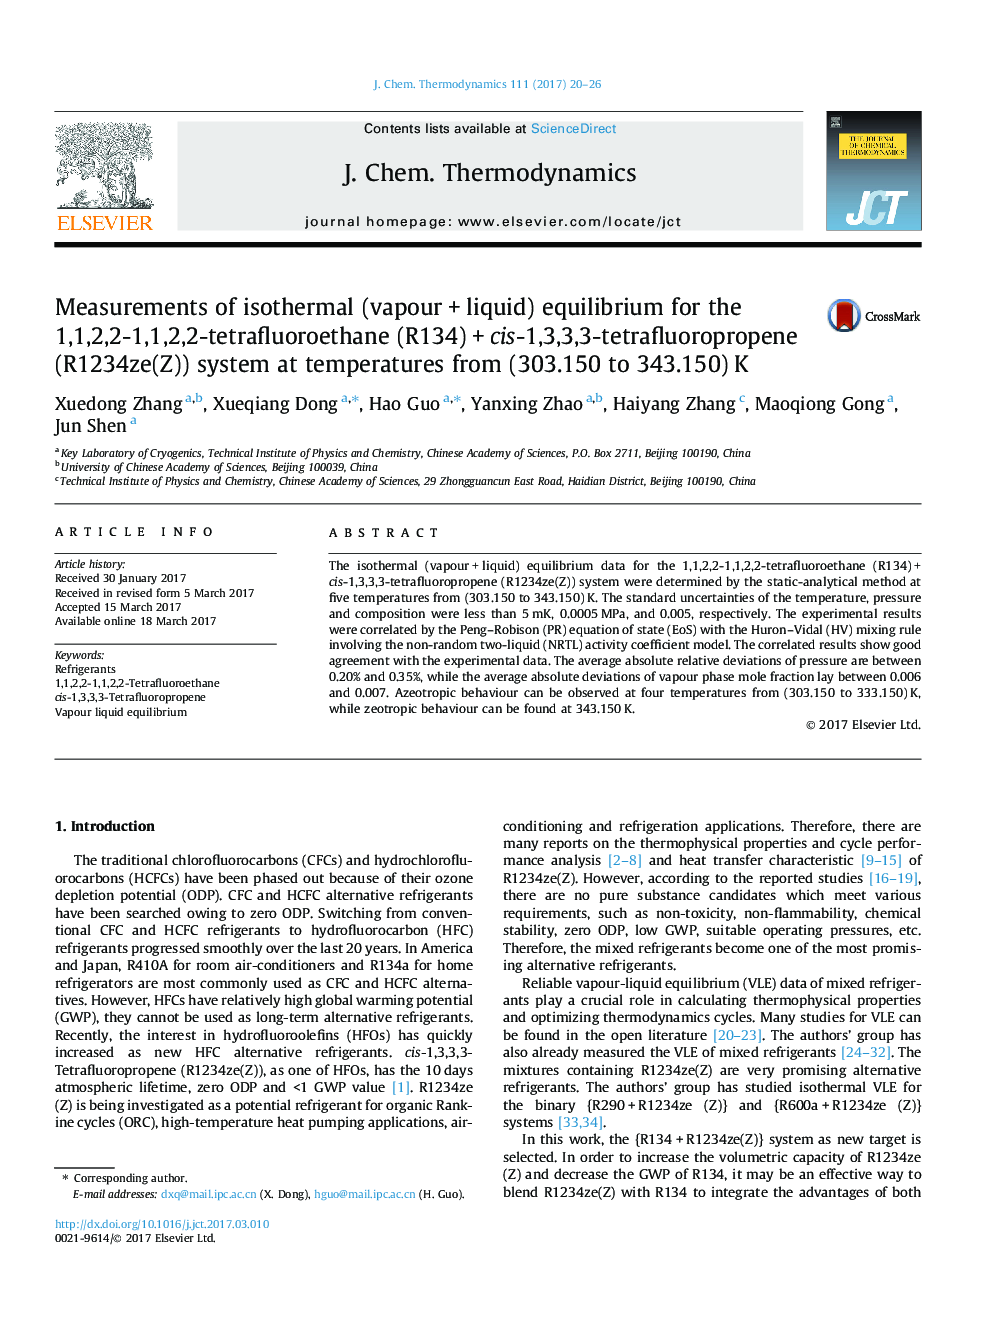 Measurements of isothermal (vapourÂ +Â liquid) equilibrium for the 1,1,2,2-1,1,2,2-tetrafluoroethane (R134)Â +Â cis-1,3,3,3-tetrafluoropropene (R1234ze(Z)) system at temperatures from (303.150 to 343.150)Â K